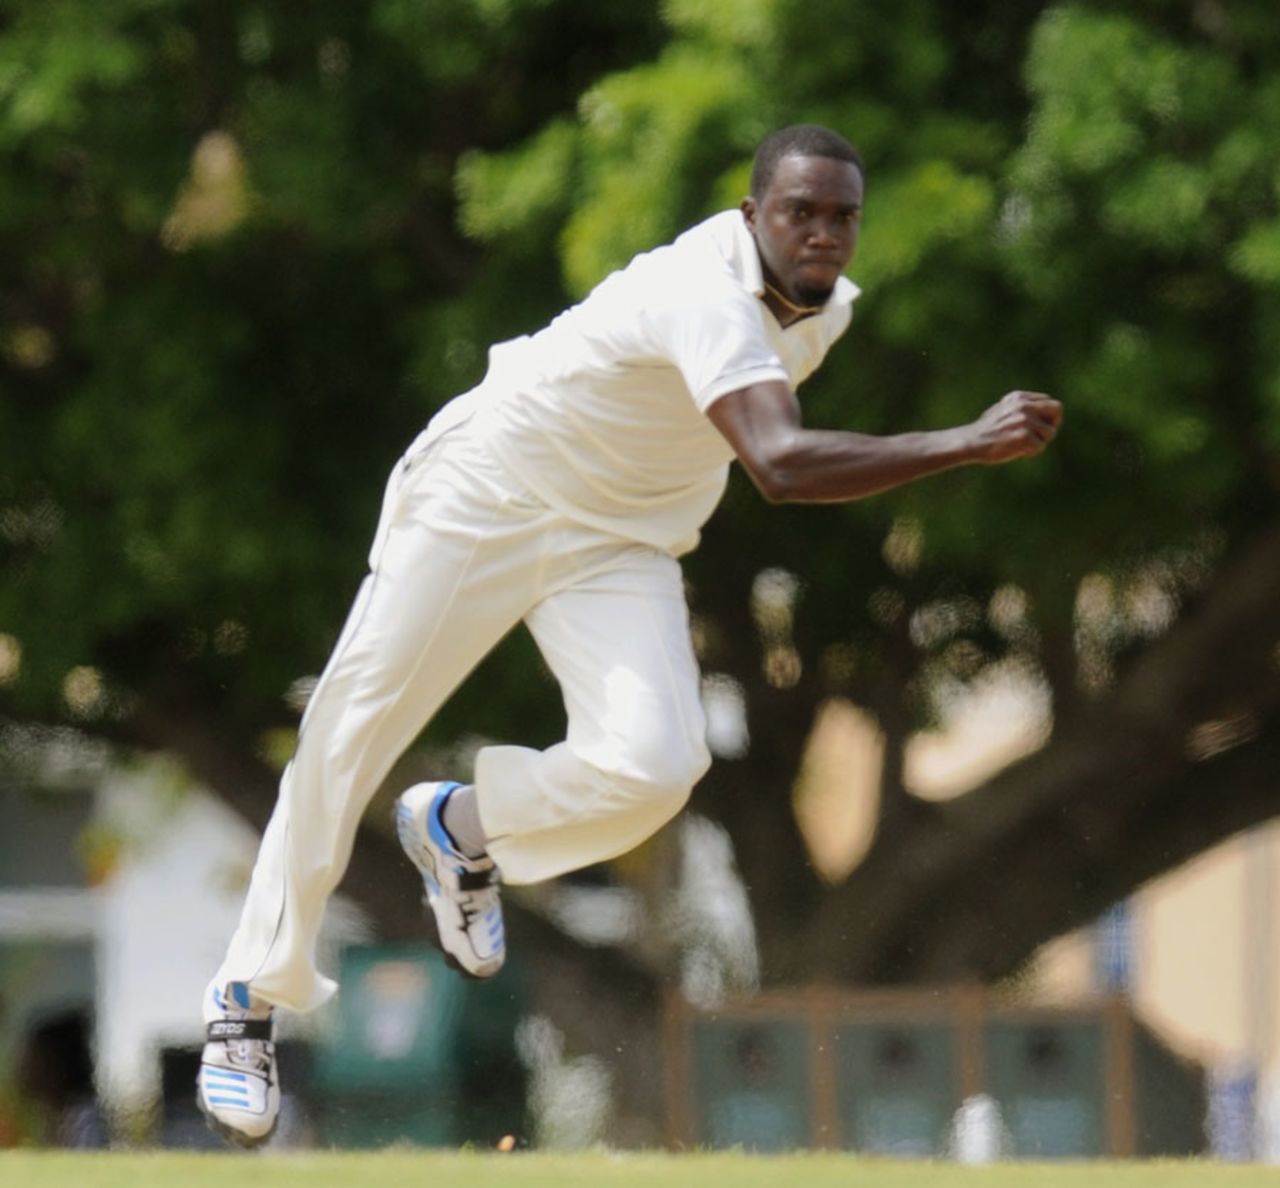 Jerome Taylor hurls in a delivery, Combined Campuses and Colleges v Jamaica, Regional Four Day Competition, Jamaica, 2nd day, April 13, 2014